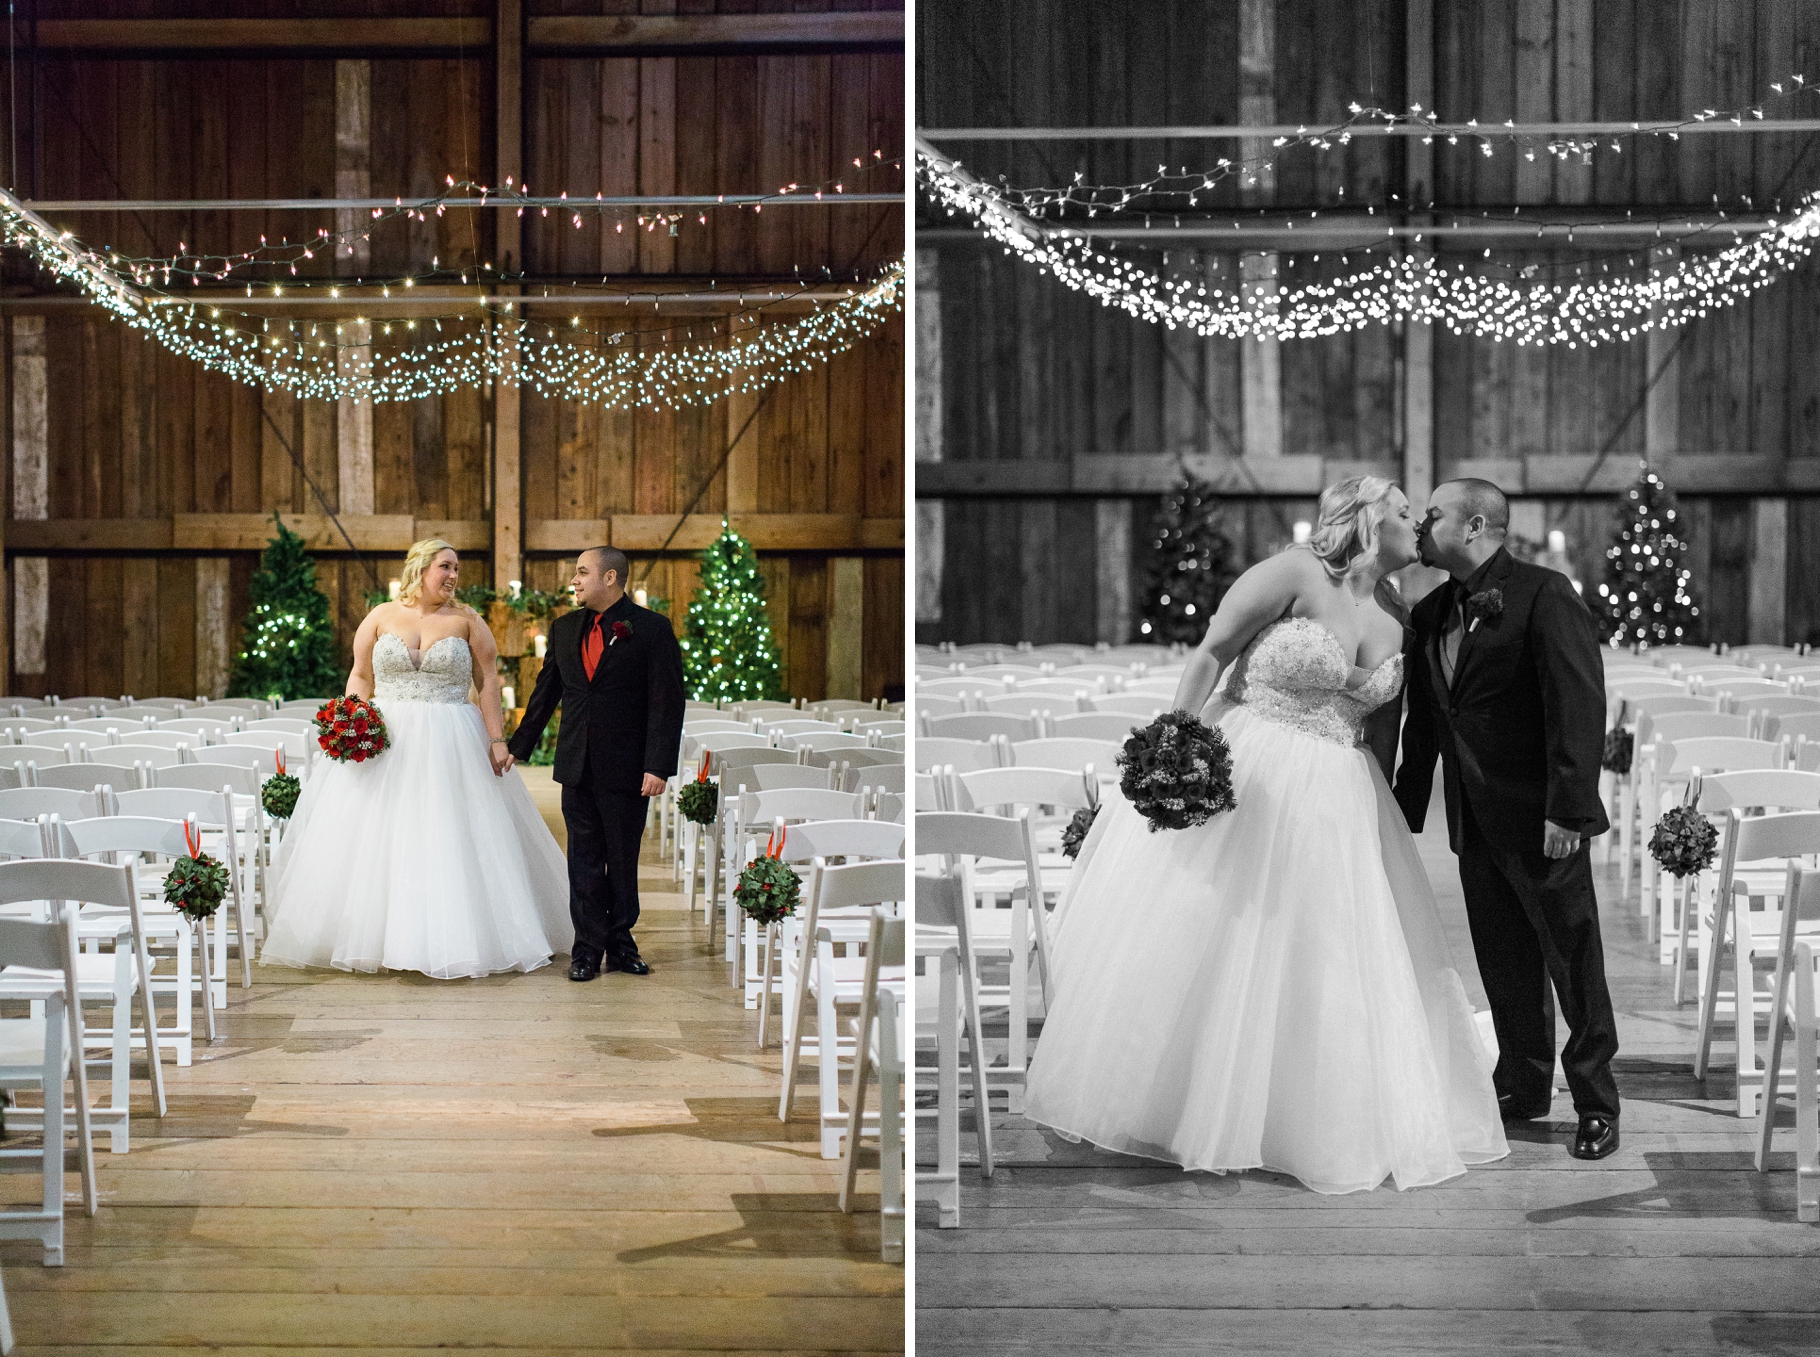 8-First-Look-Bride-Groom-Pickering-Barn-Issaquah-Winter-Wedding-Photographer-Seattle-Photography-by-Betty-Elaine